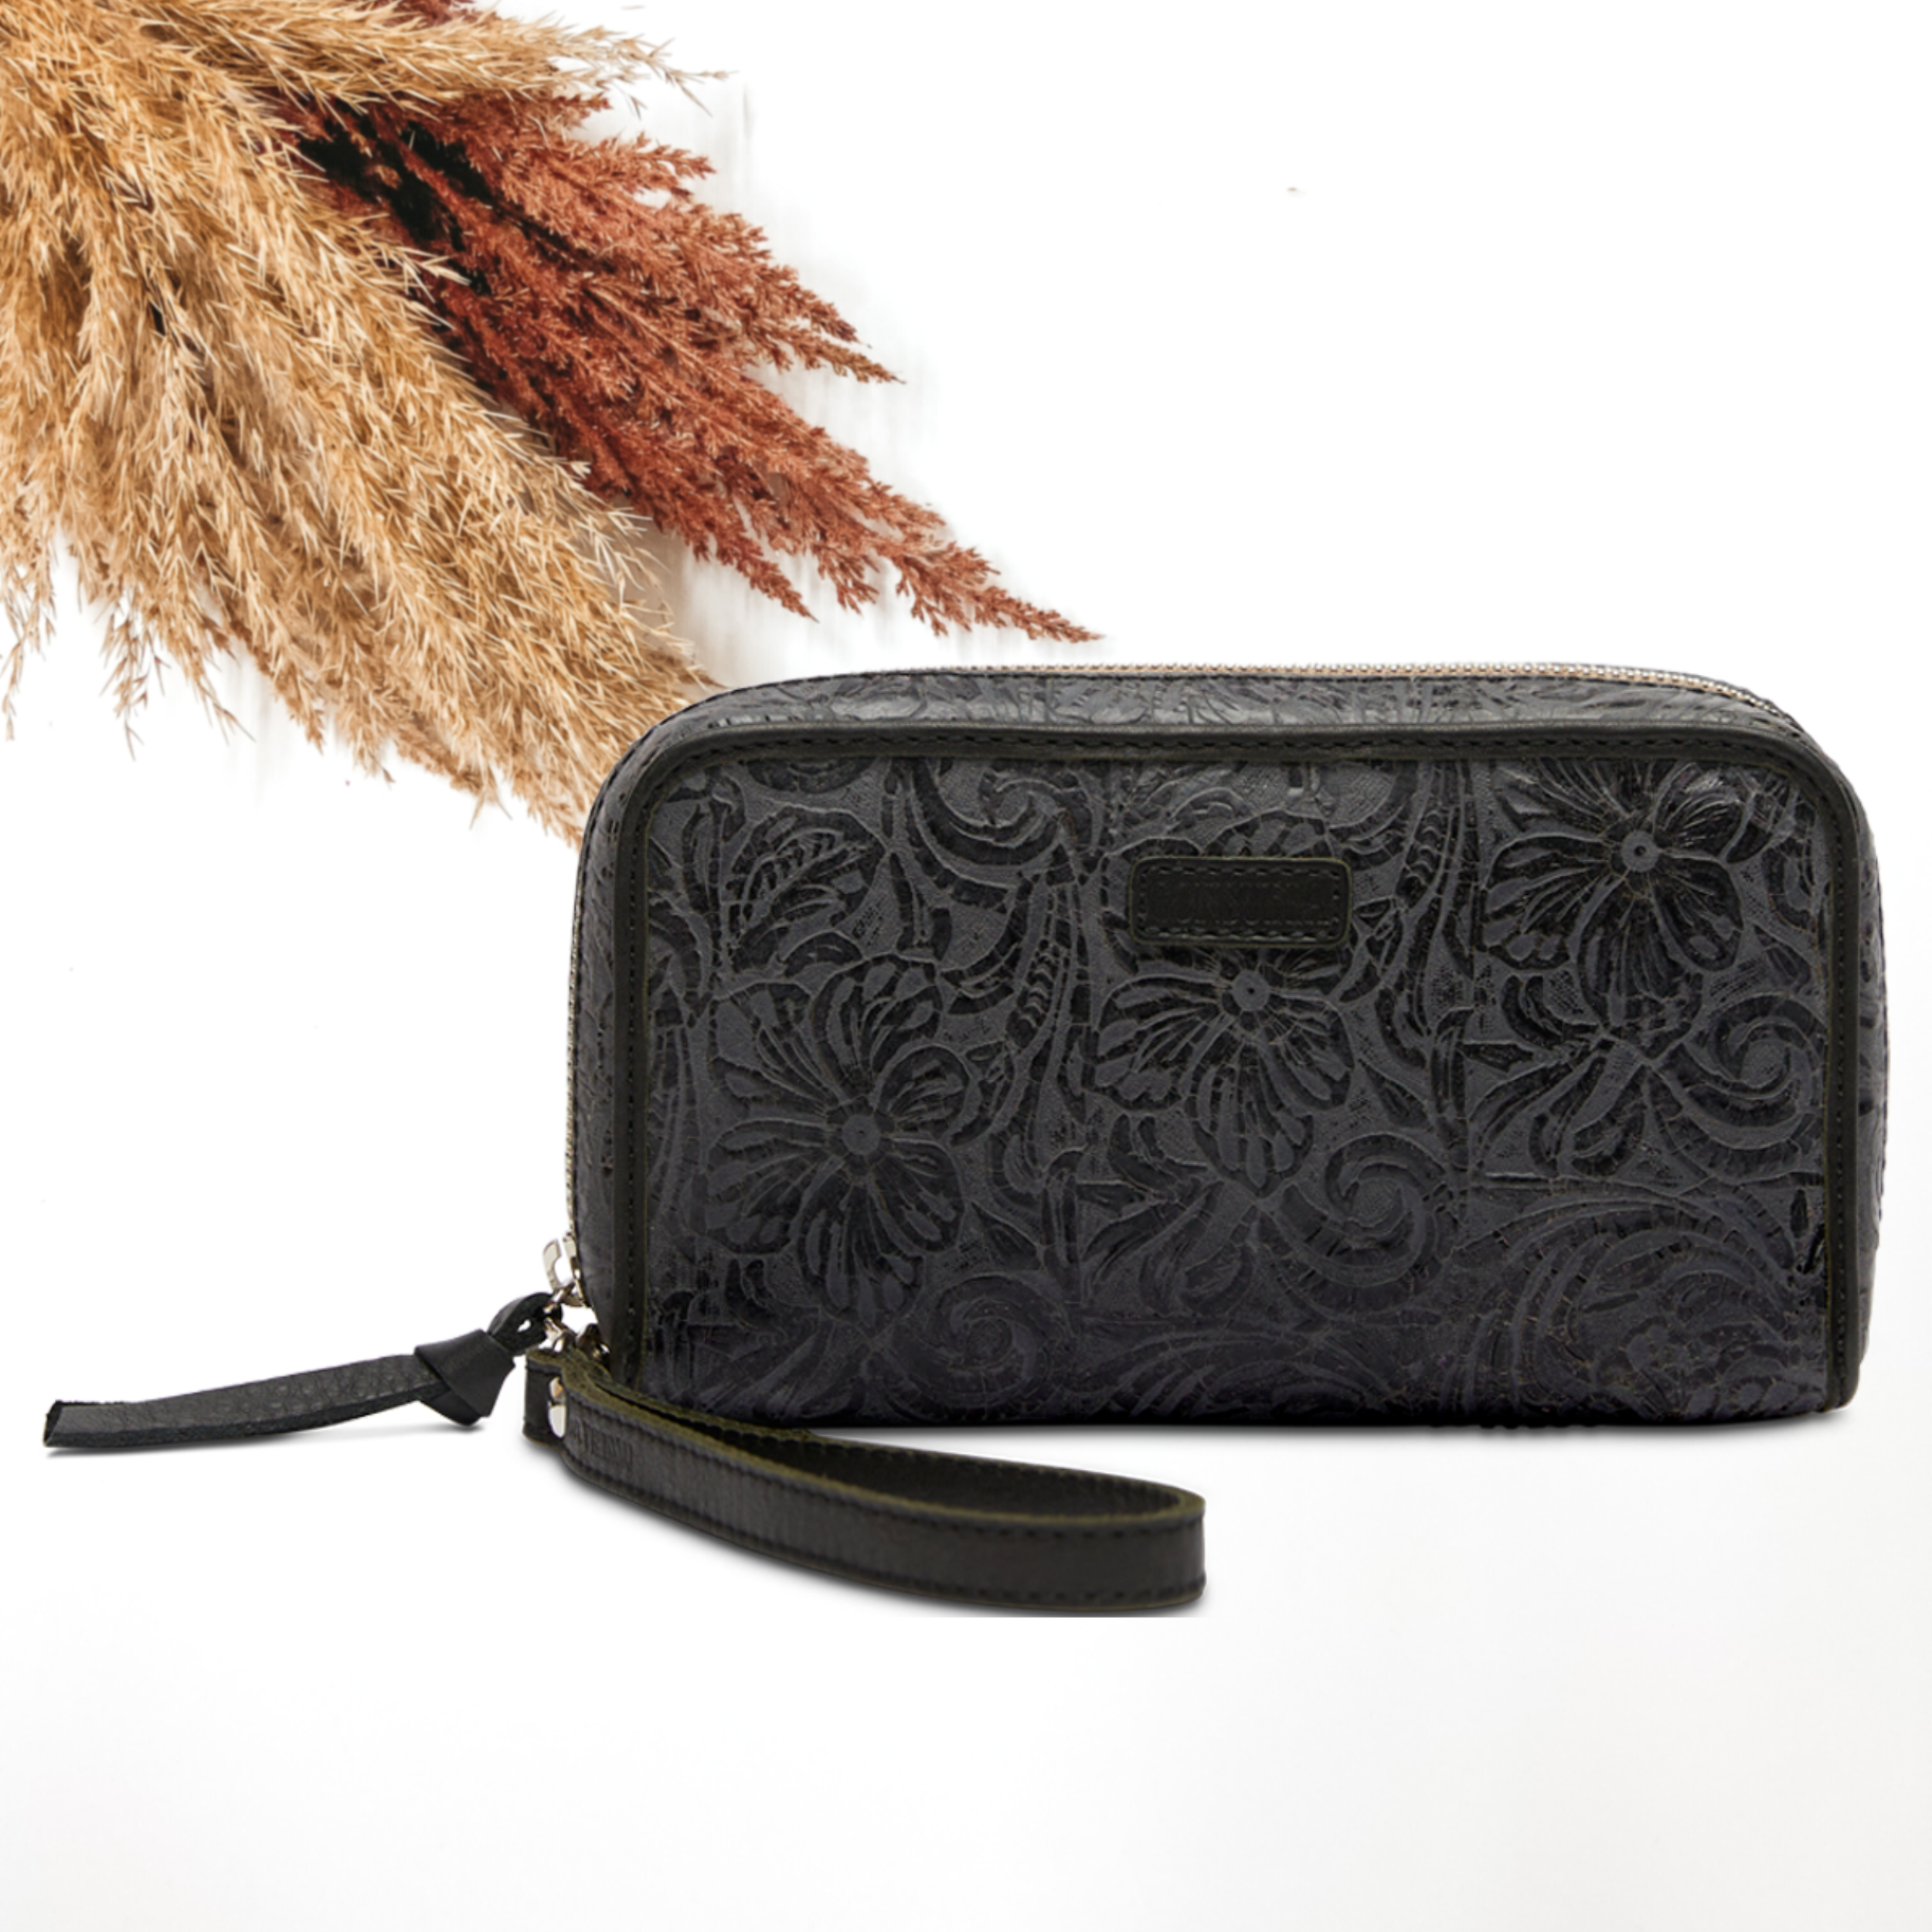 Pictured on a white background is a black, tooled leather print wristlet wallet. This wallet includes a black leather outline and wristlet.